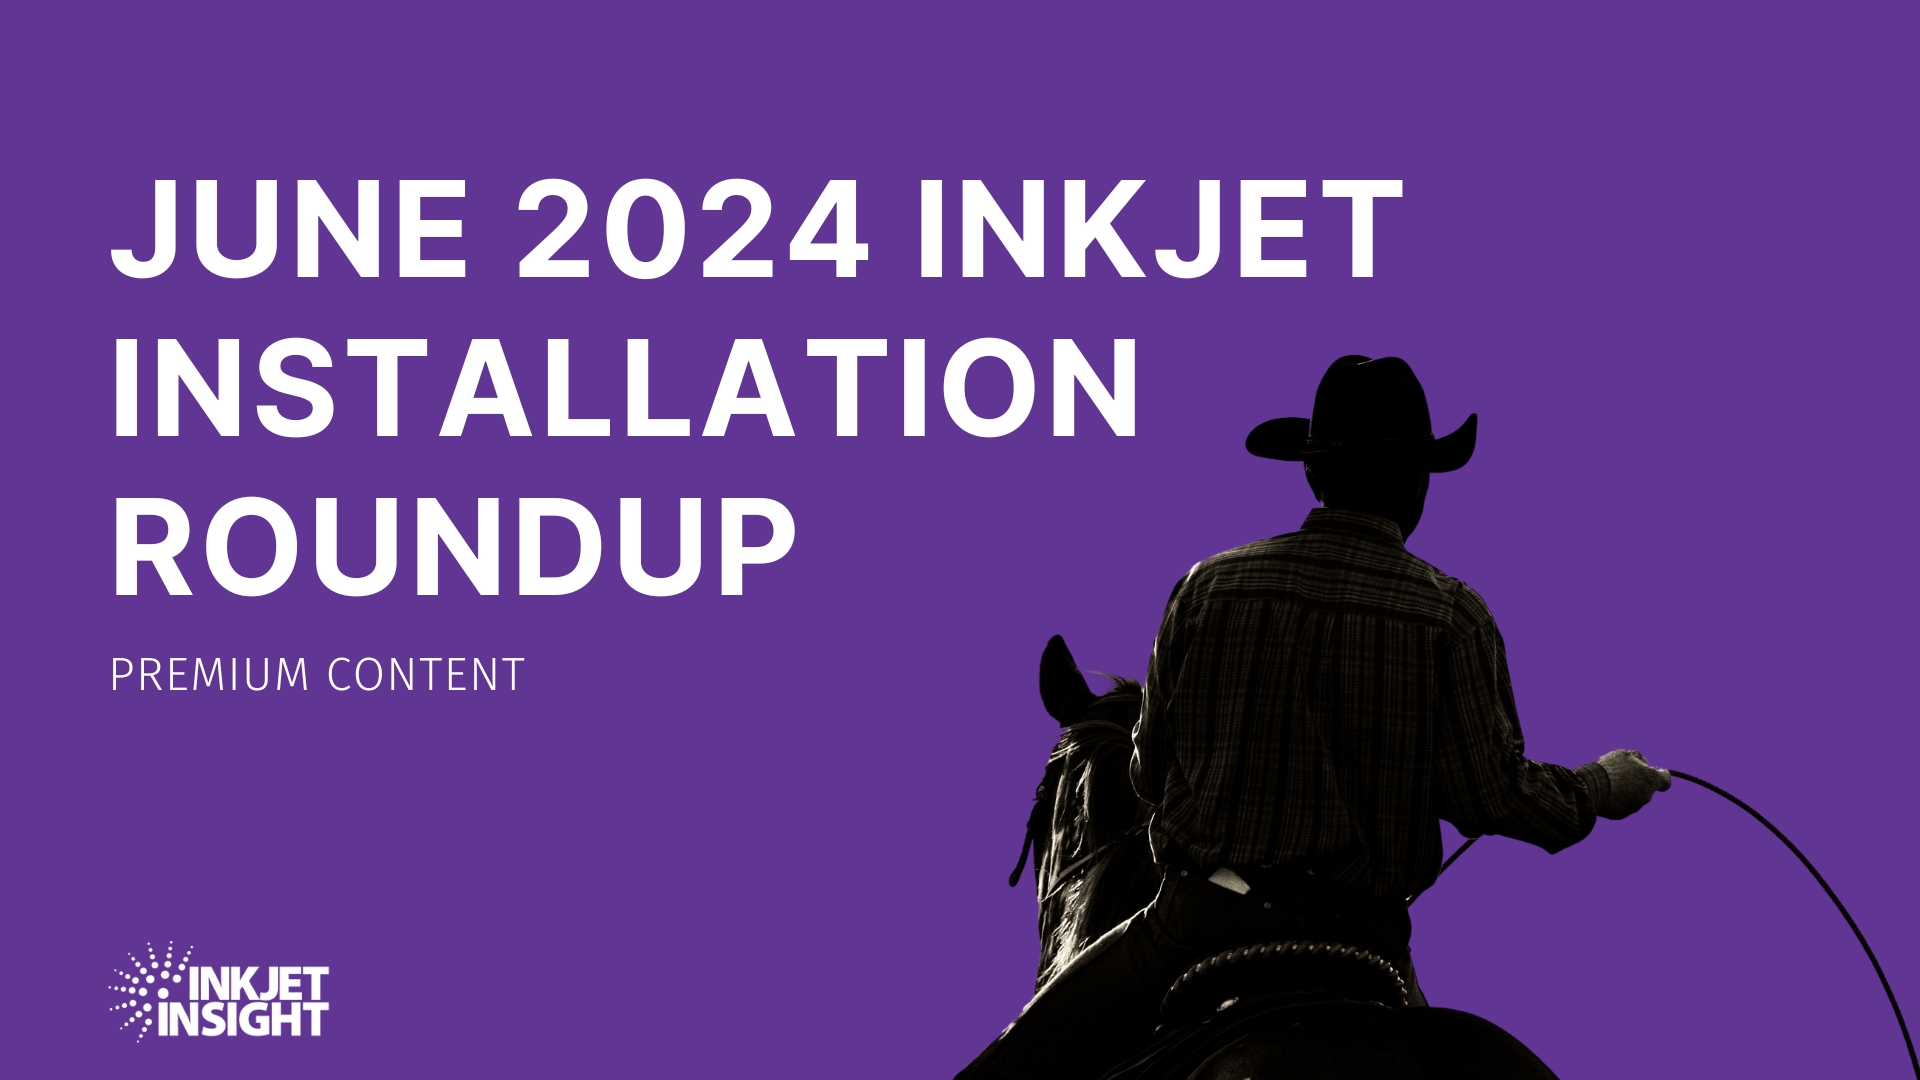 Featured image for “June 2024 Inkjet Installation Roundup”